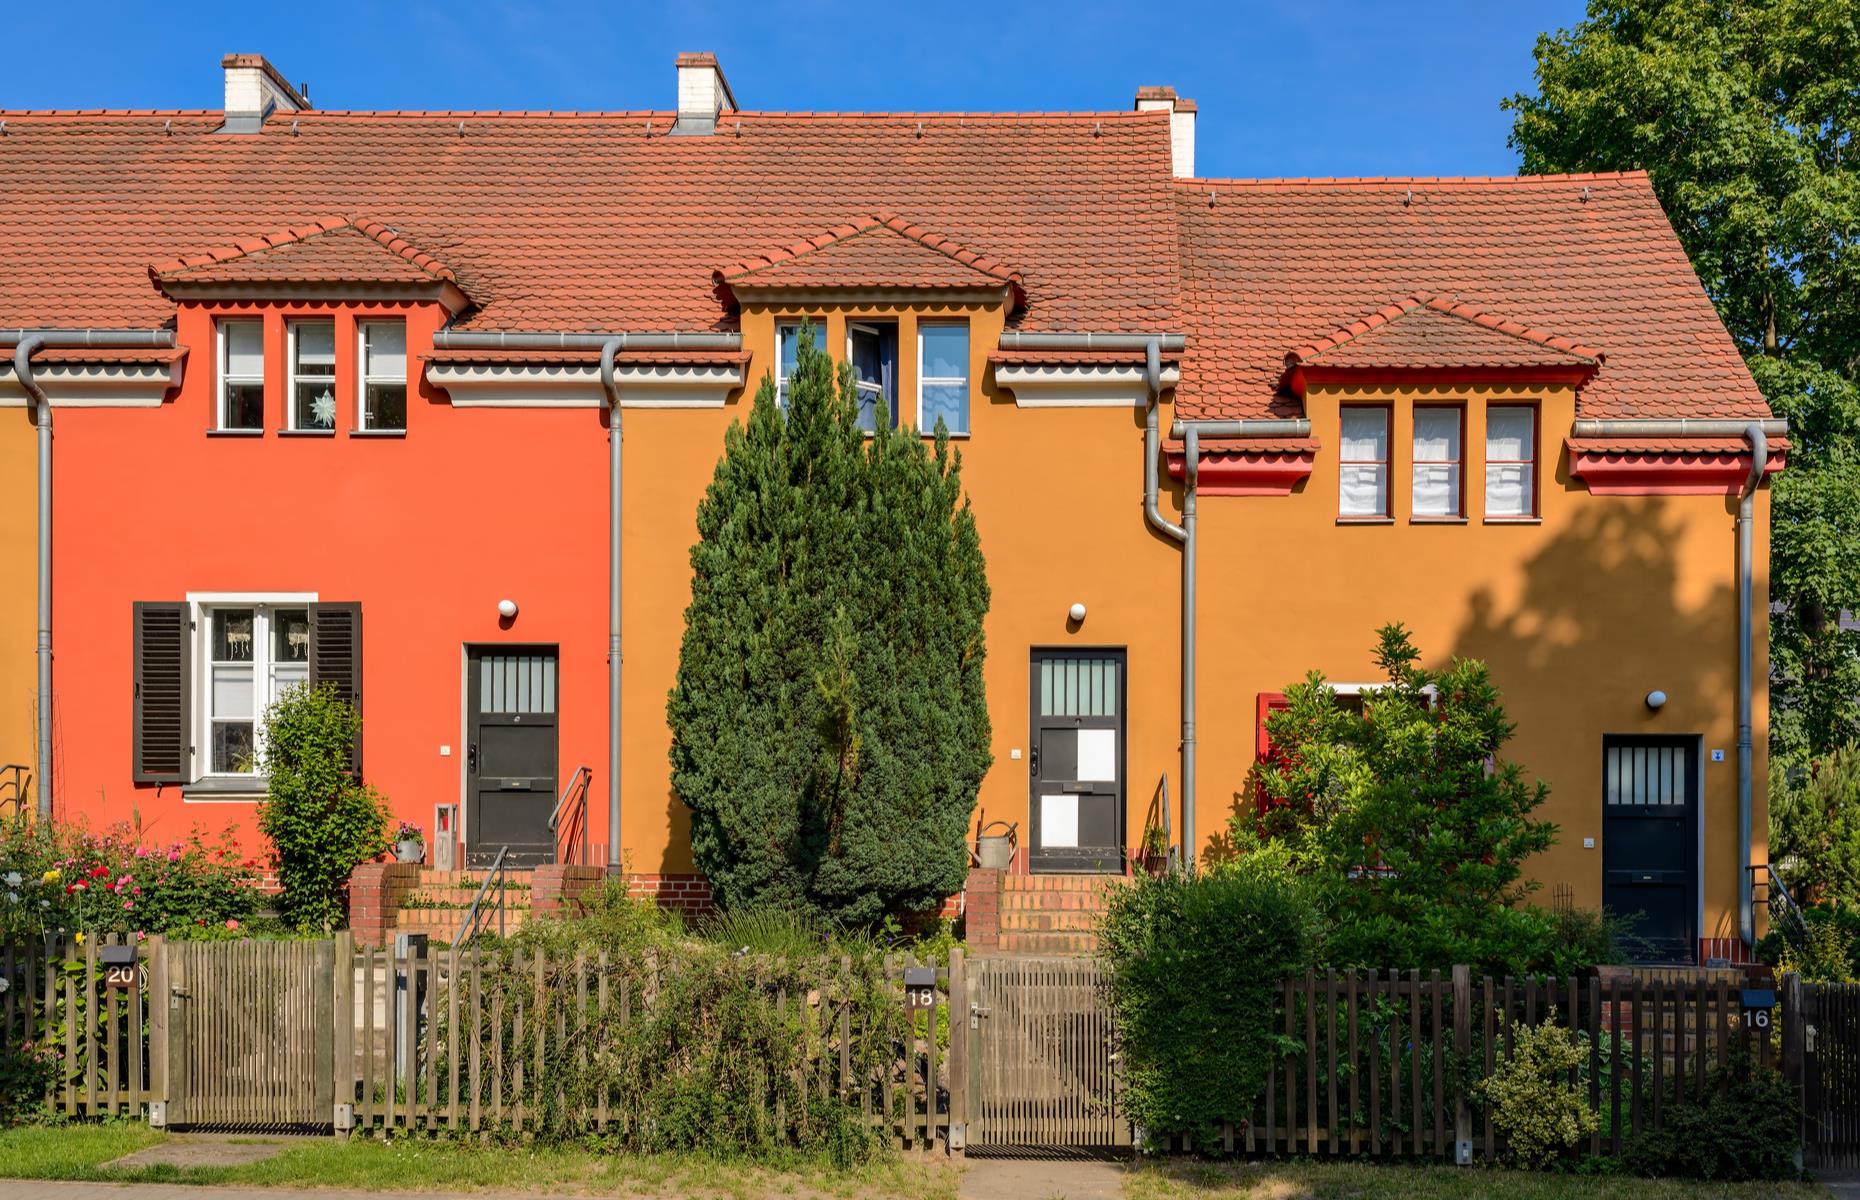 <p>These warm-hued homes are among six Modernism housing estates in Berlin that have been listed as <a href="http://whc.unesco.org/en/list/1239">UNESCO World Heritage Sites</a>. These were bold, colorful examples of a new attitude to social housing, with cheery hues, clever use of space and lots of natural light creating a striking contrast to the dark, cramped flats that were previously the norm. Gartenstadt Falkenberg was the first to be constructed, built by Bruno Taut from 1913-15. Building styles changed under Nazi rule from 1933, though most of these bright and beautiful buildings survived.</p>